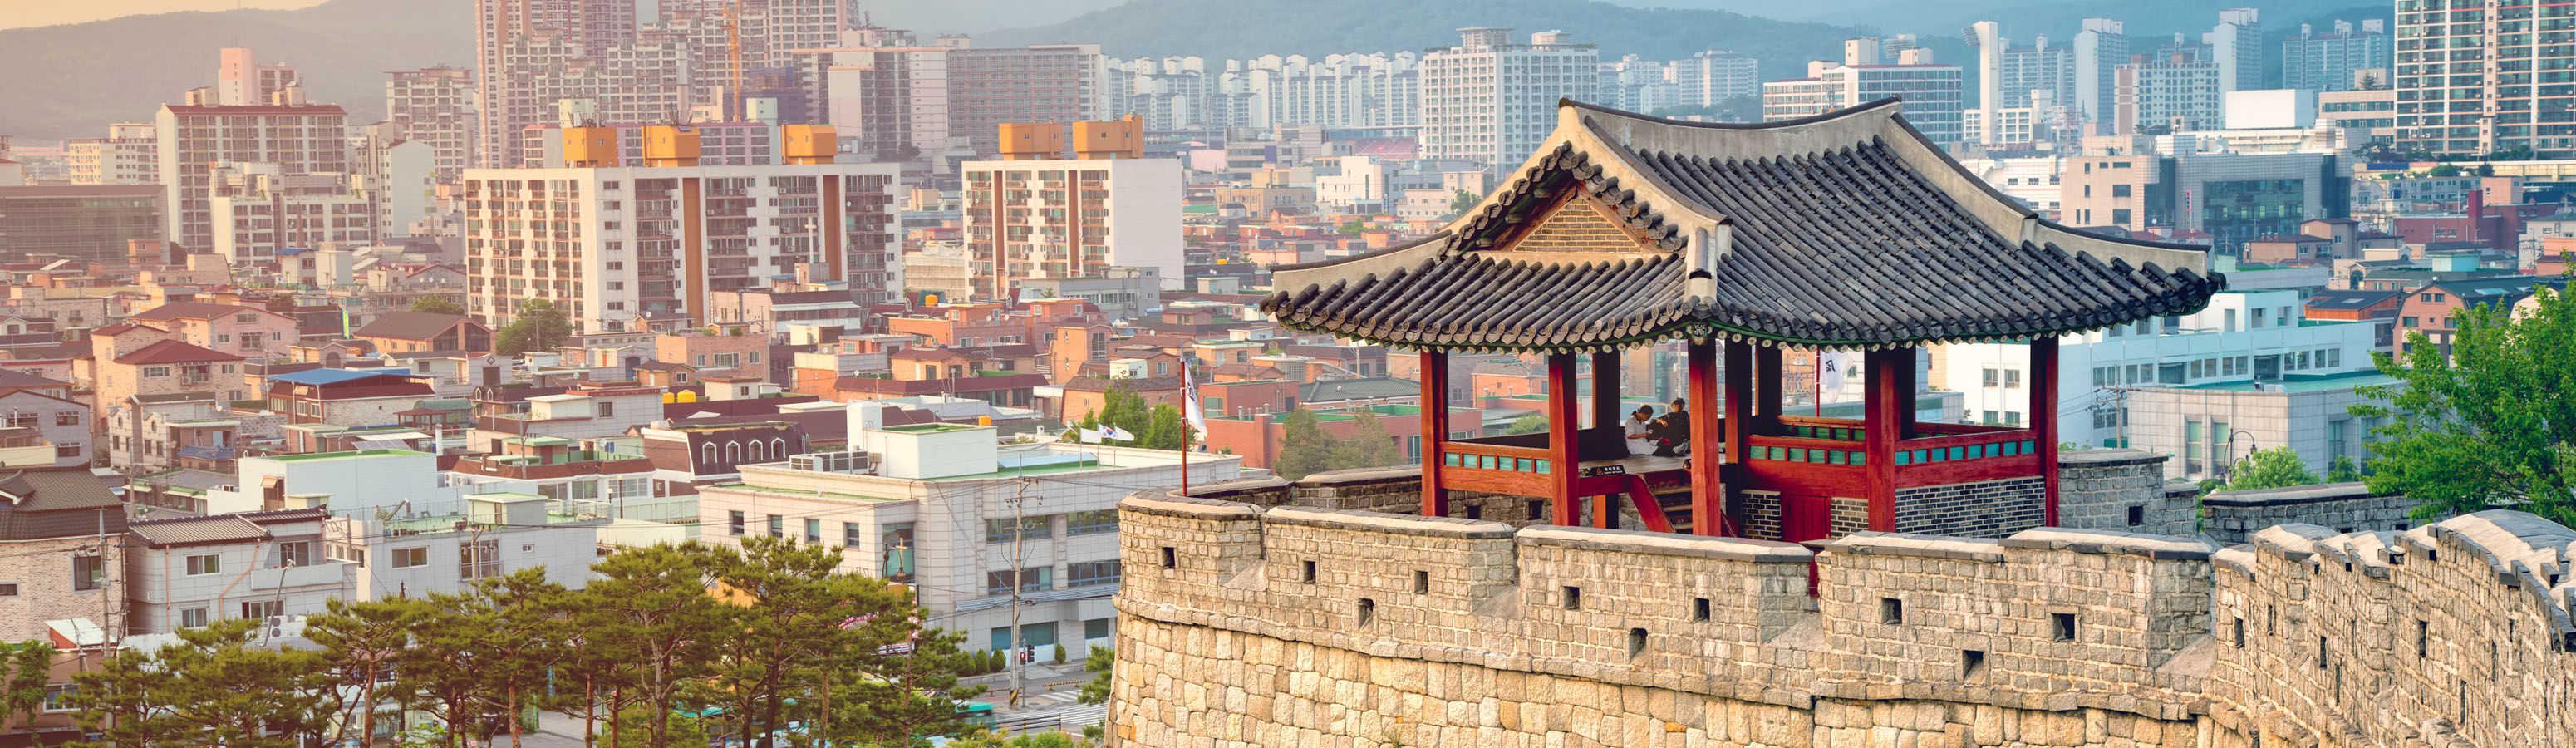 City surrounded by walls - Seoul